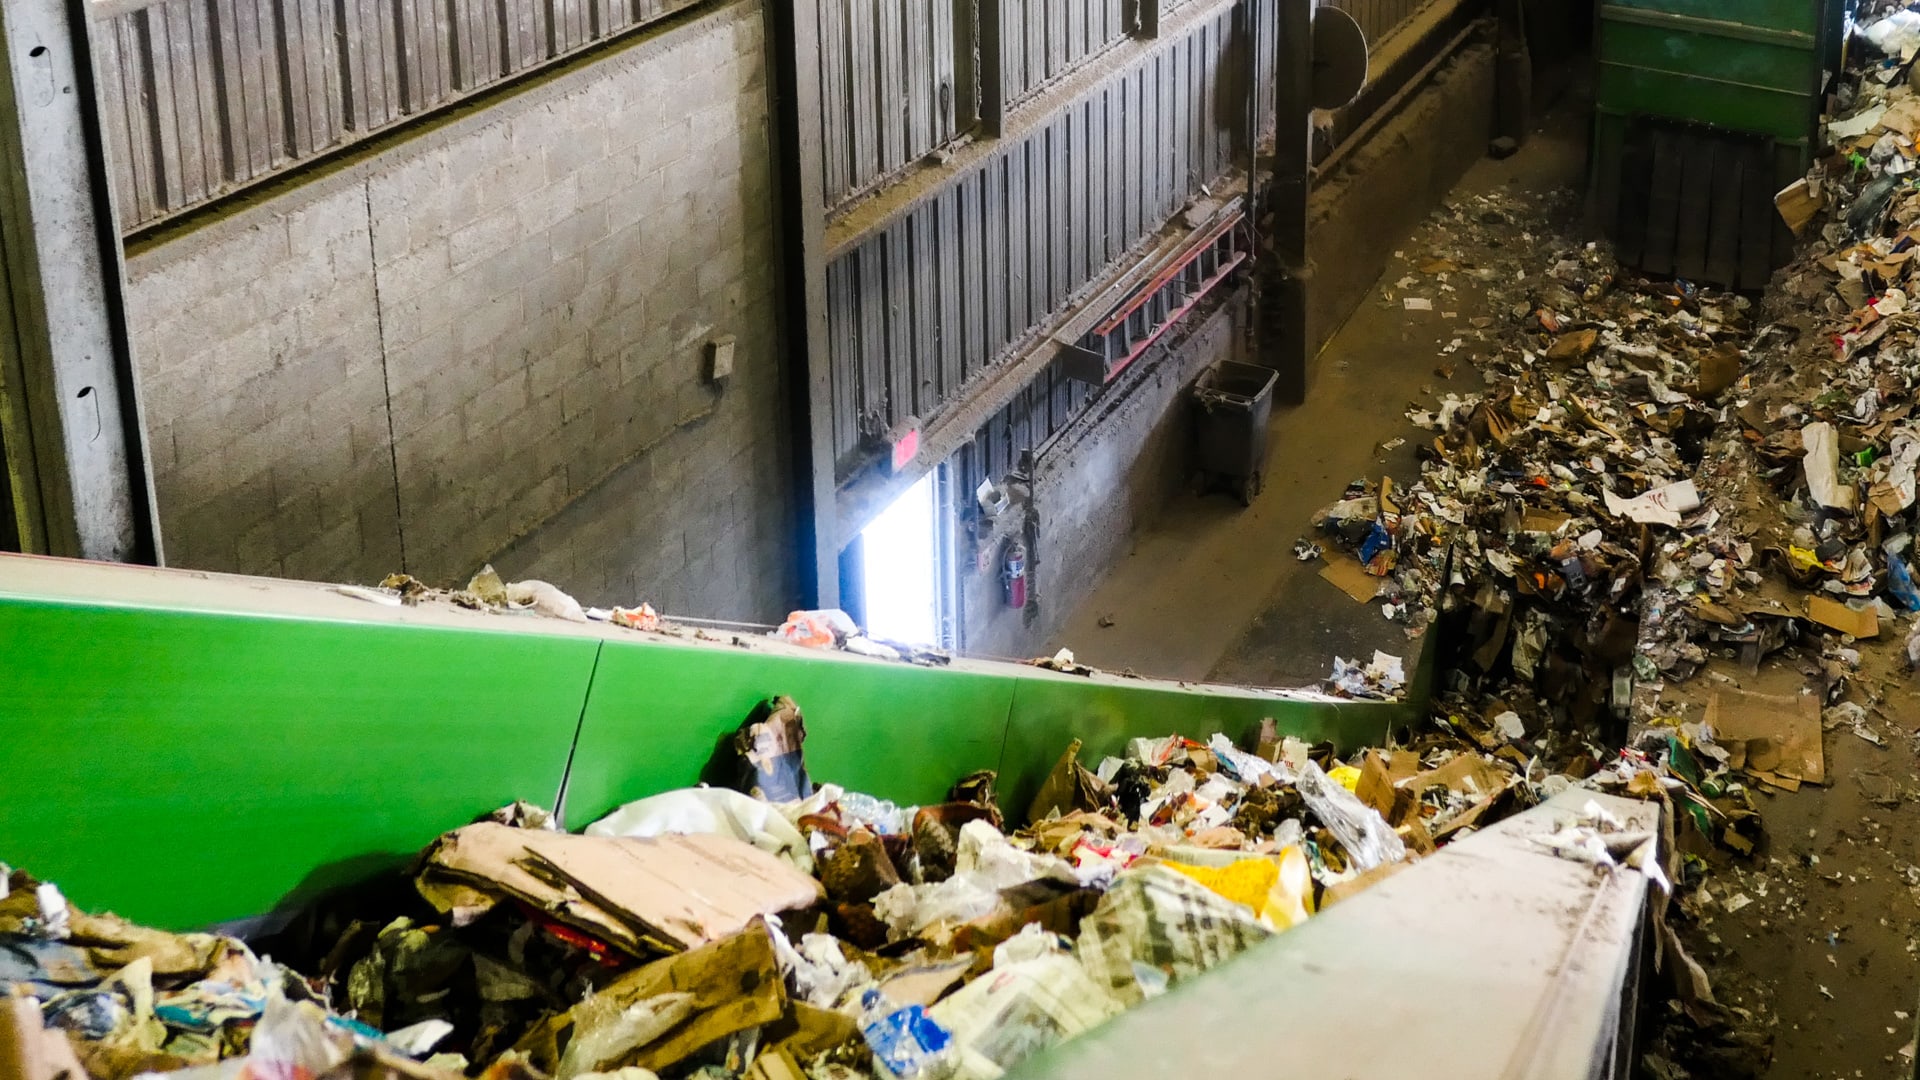 Photo of the interior of an industrial recycling facility. The left side of the photo is dominated by a large conveyor belt that is bringing trash up from ground level, about 20 feet below.